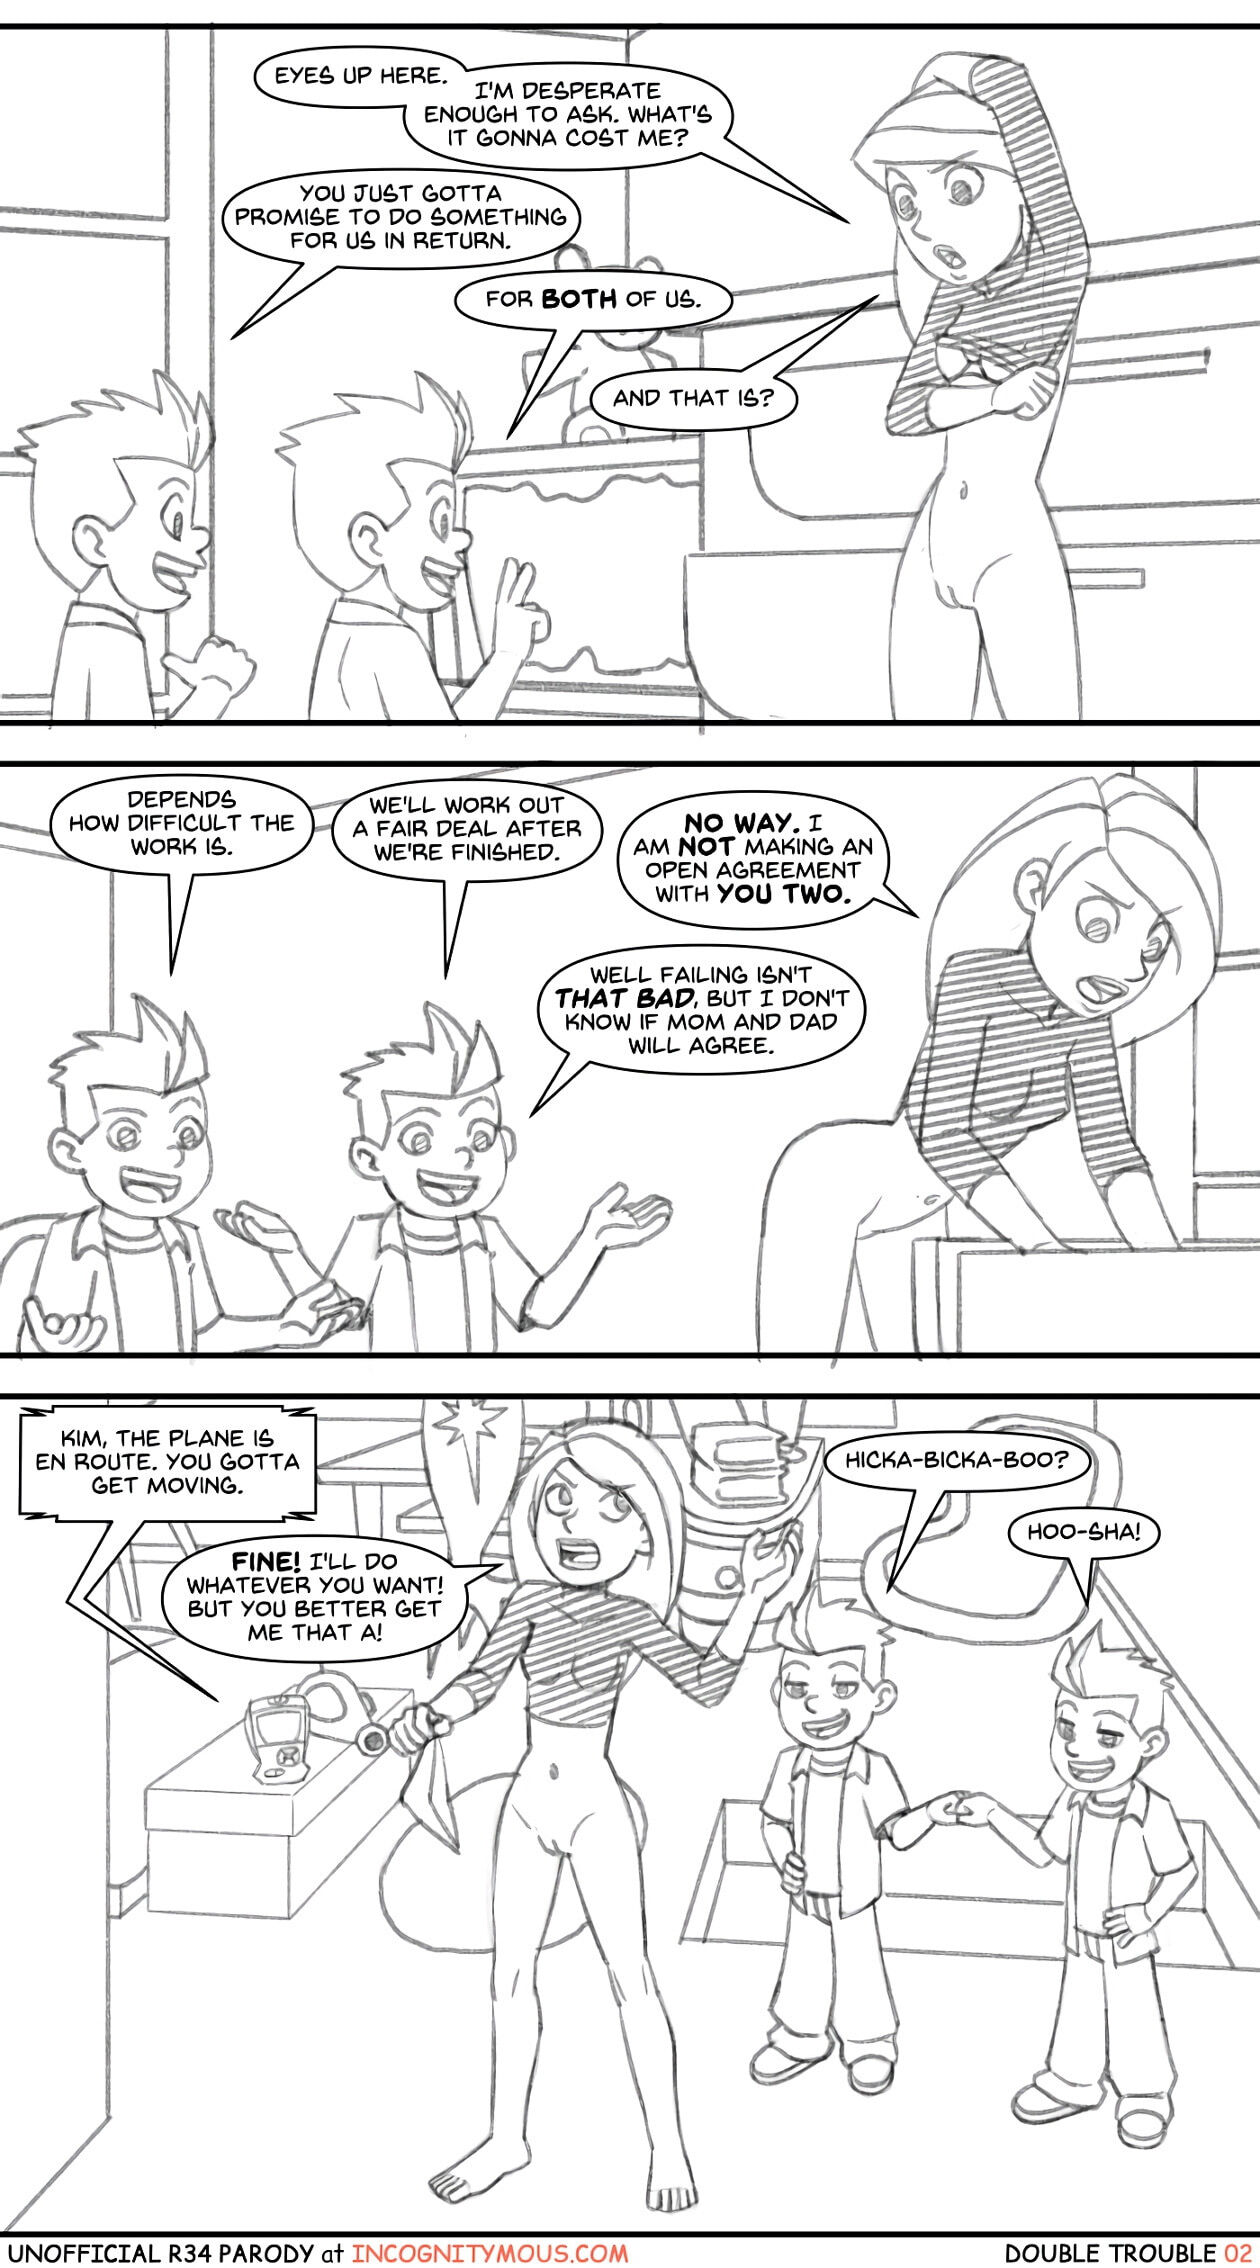 Double Trouble - Incognitymous - Page 2